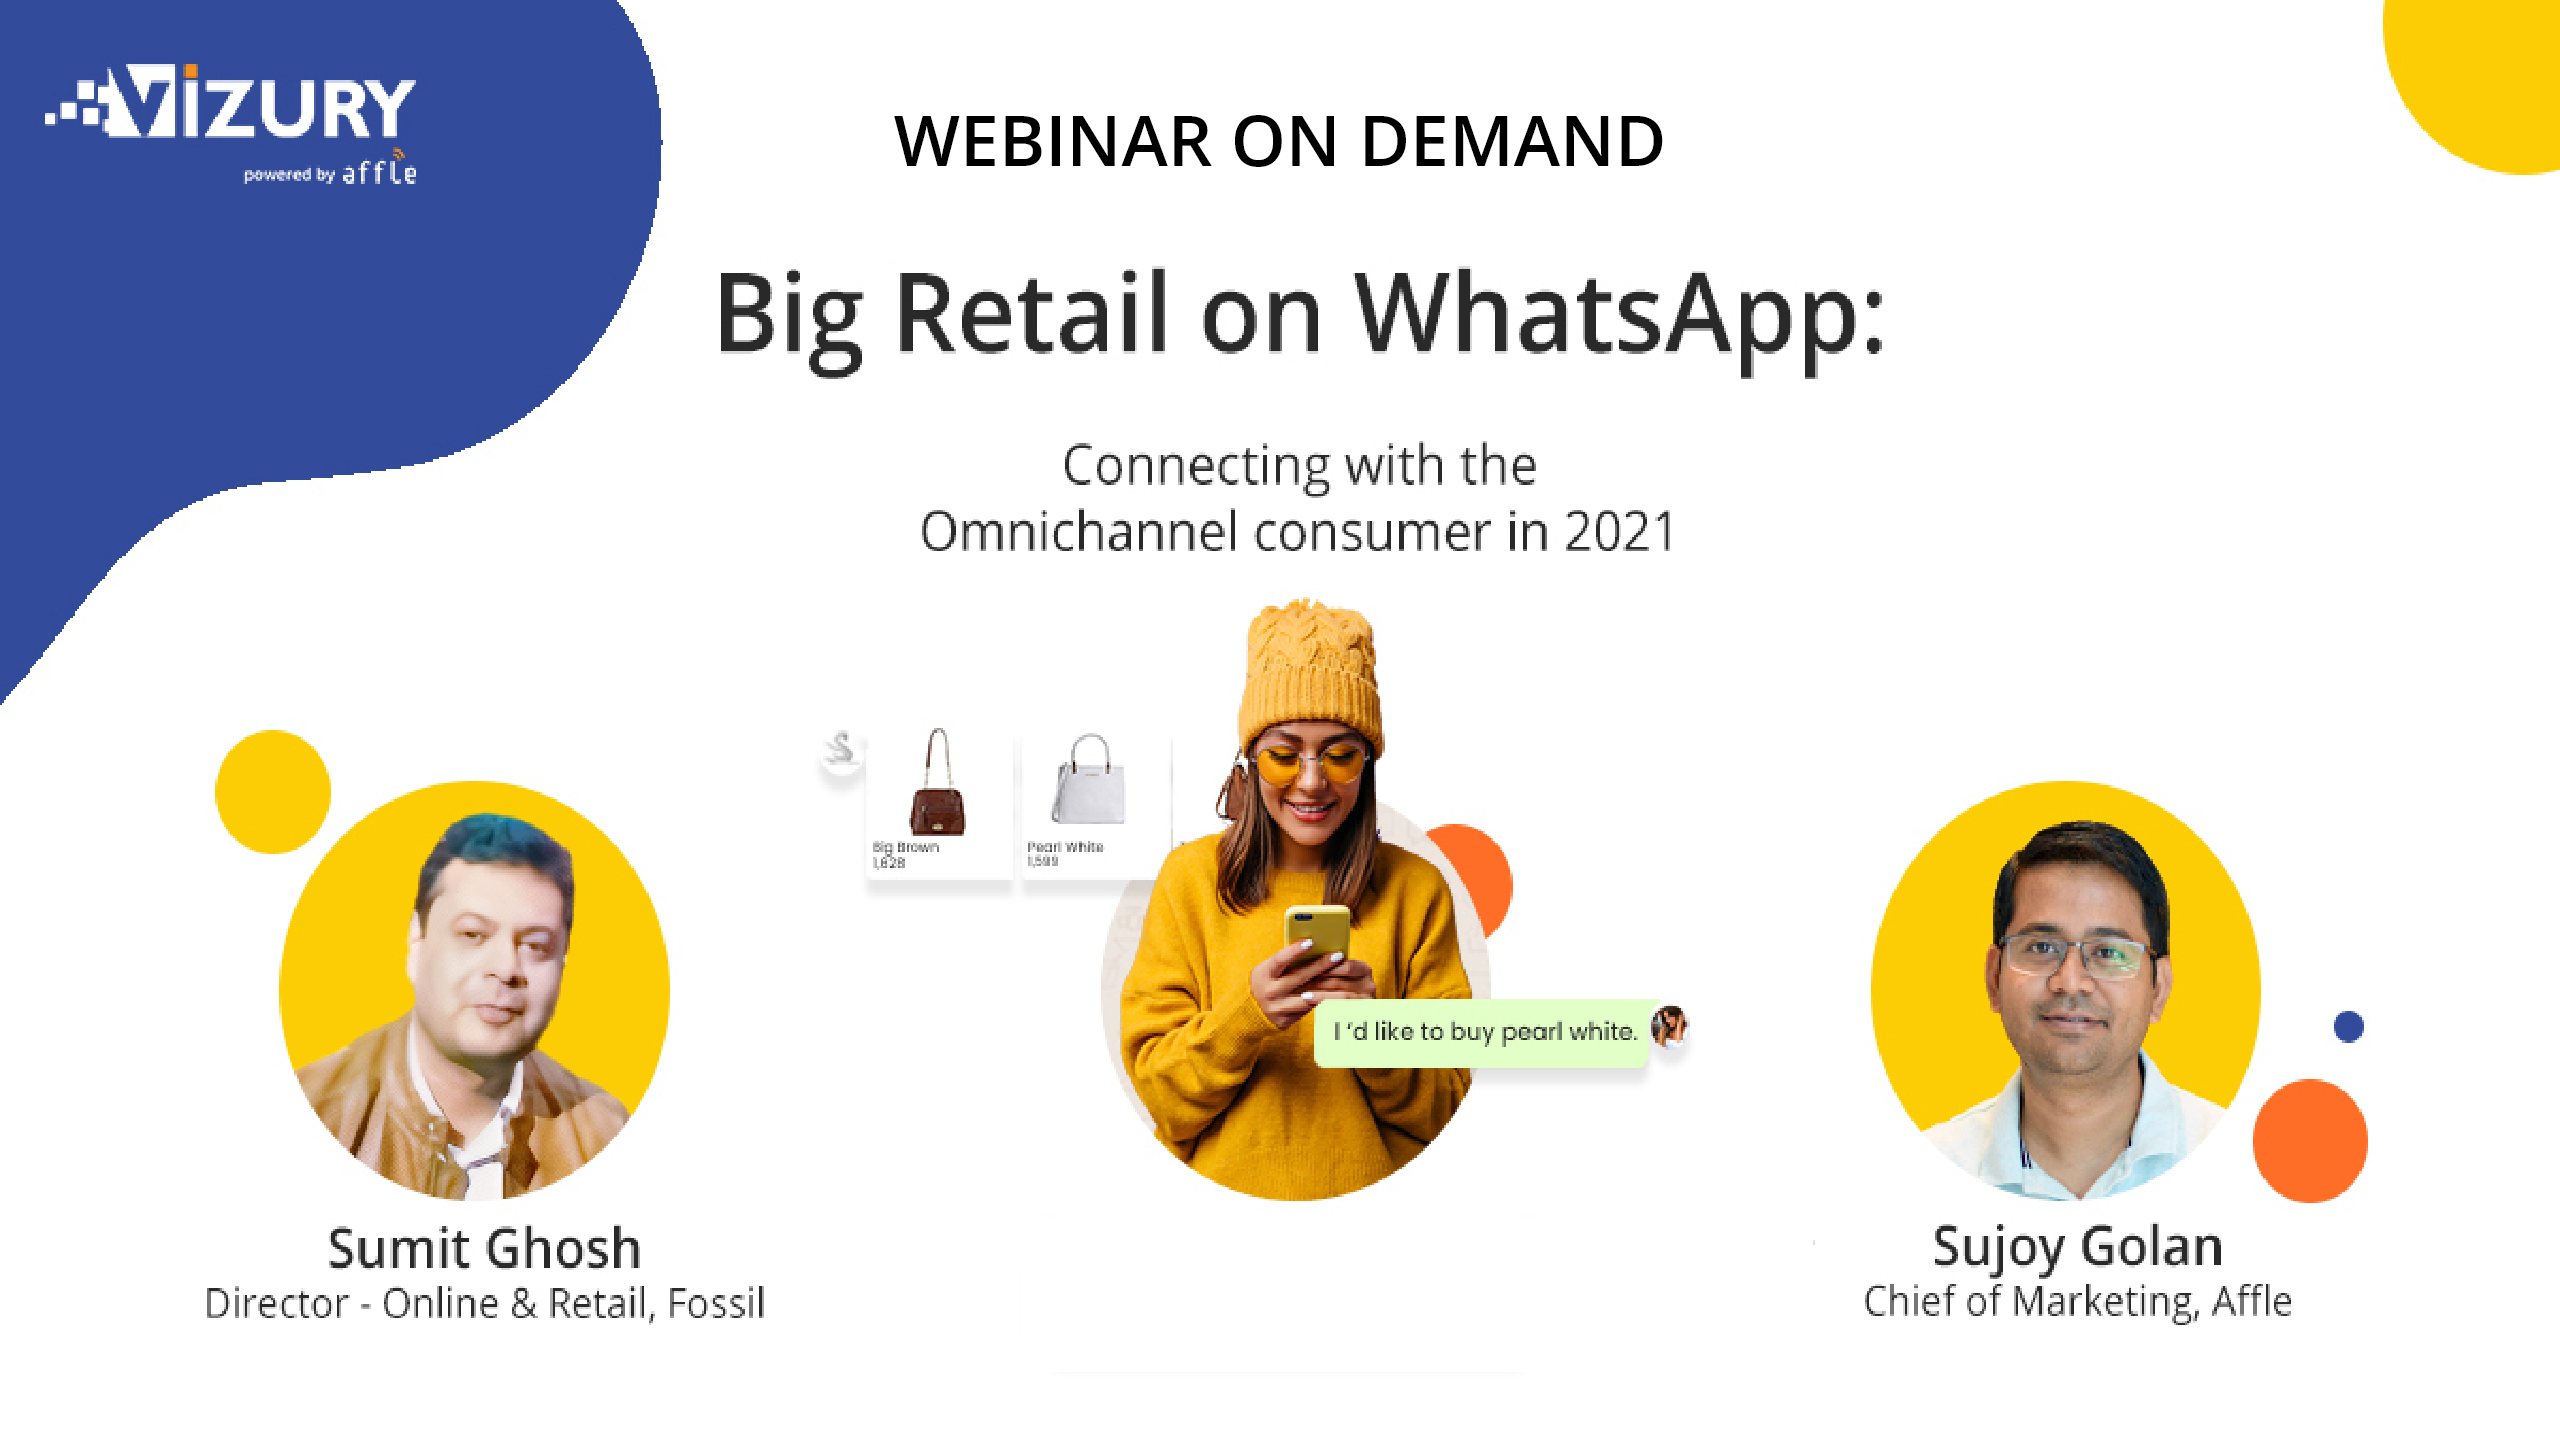 Big Retail on WhatsApp: engaging with the Omnichannel Consumer in 2021